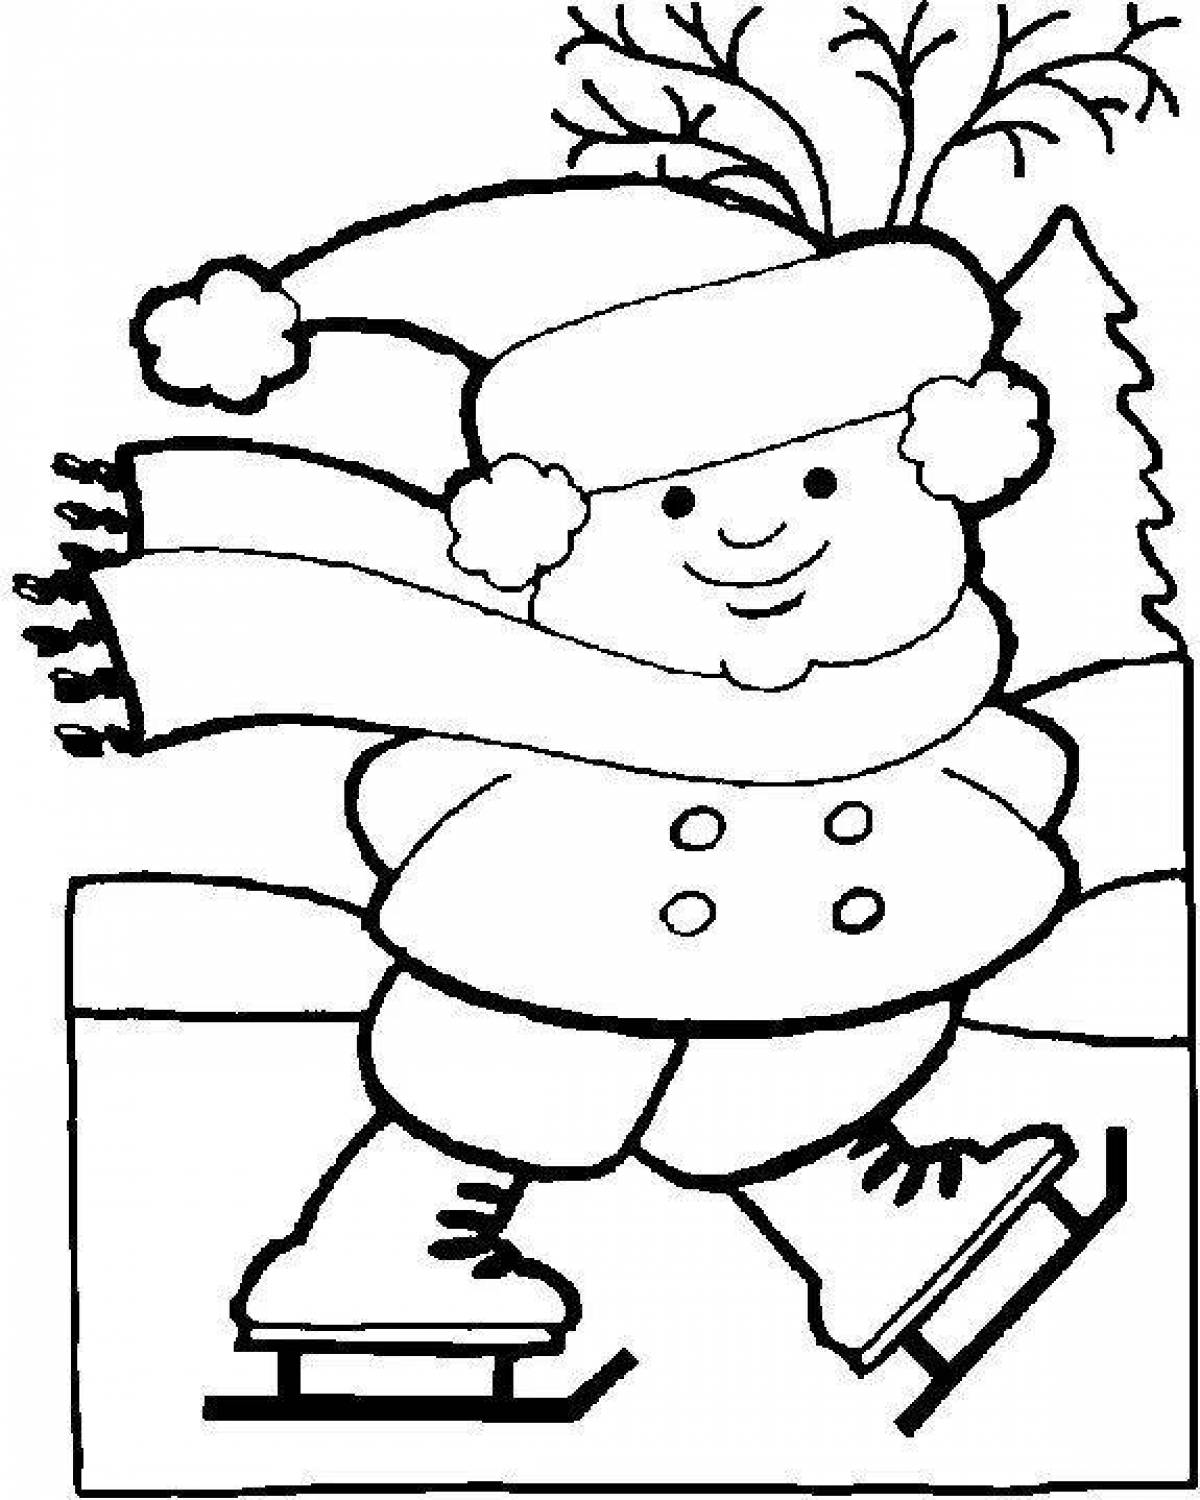 Live winter coloring for children 3-4 years old